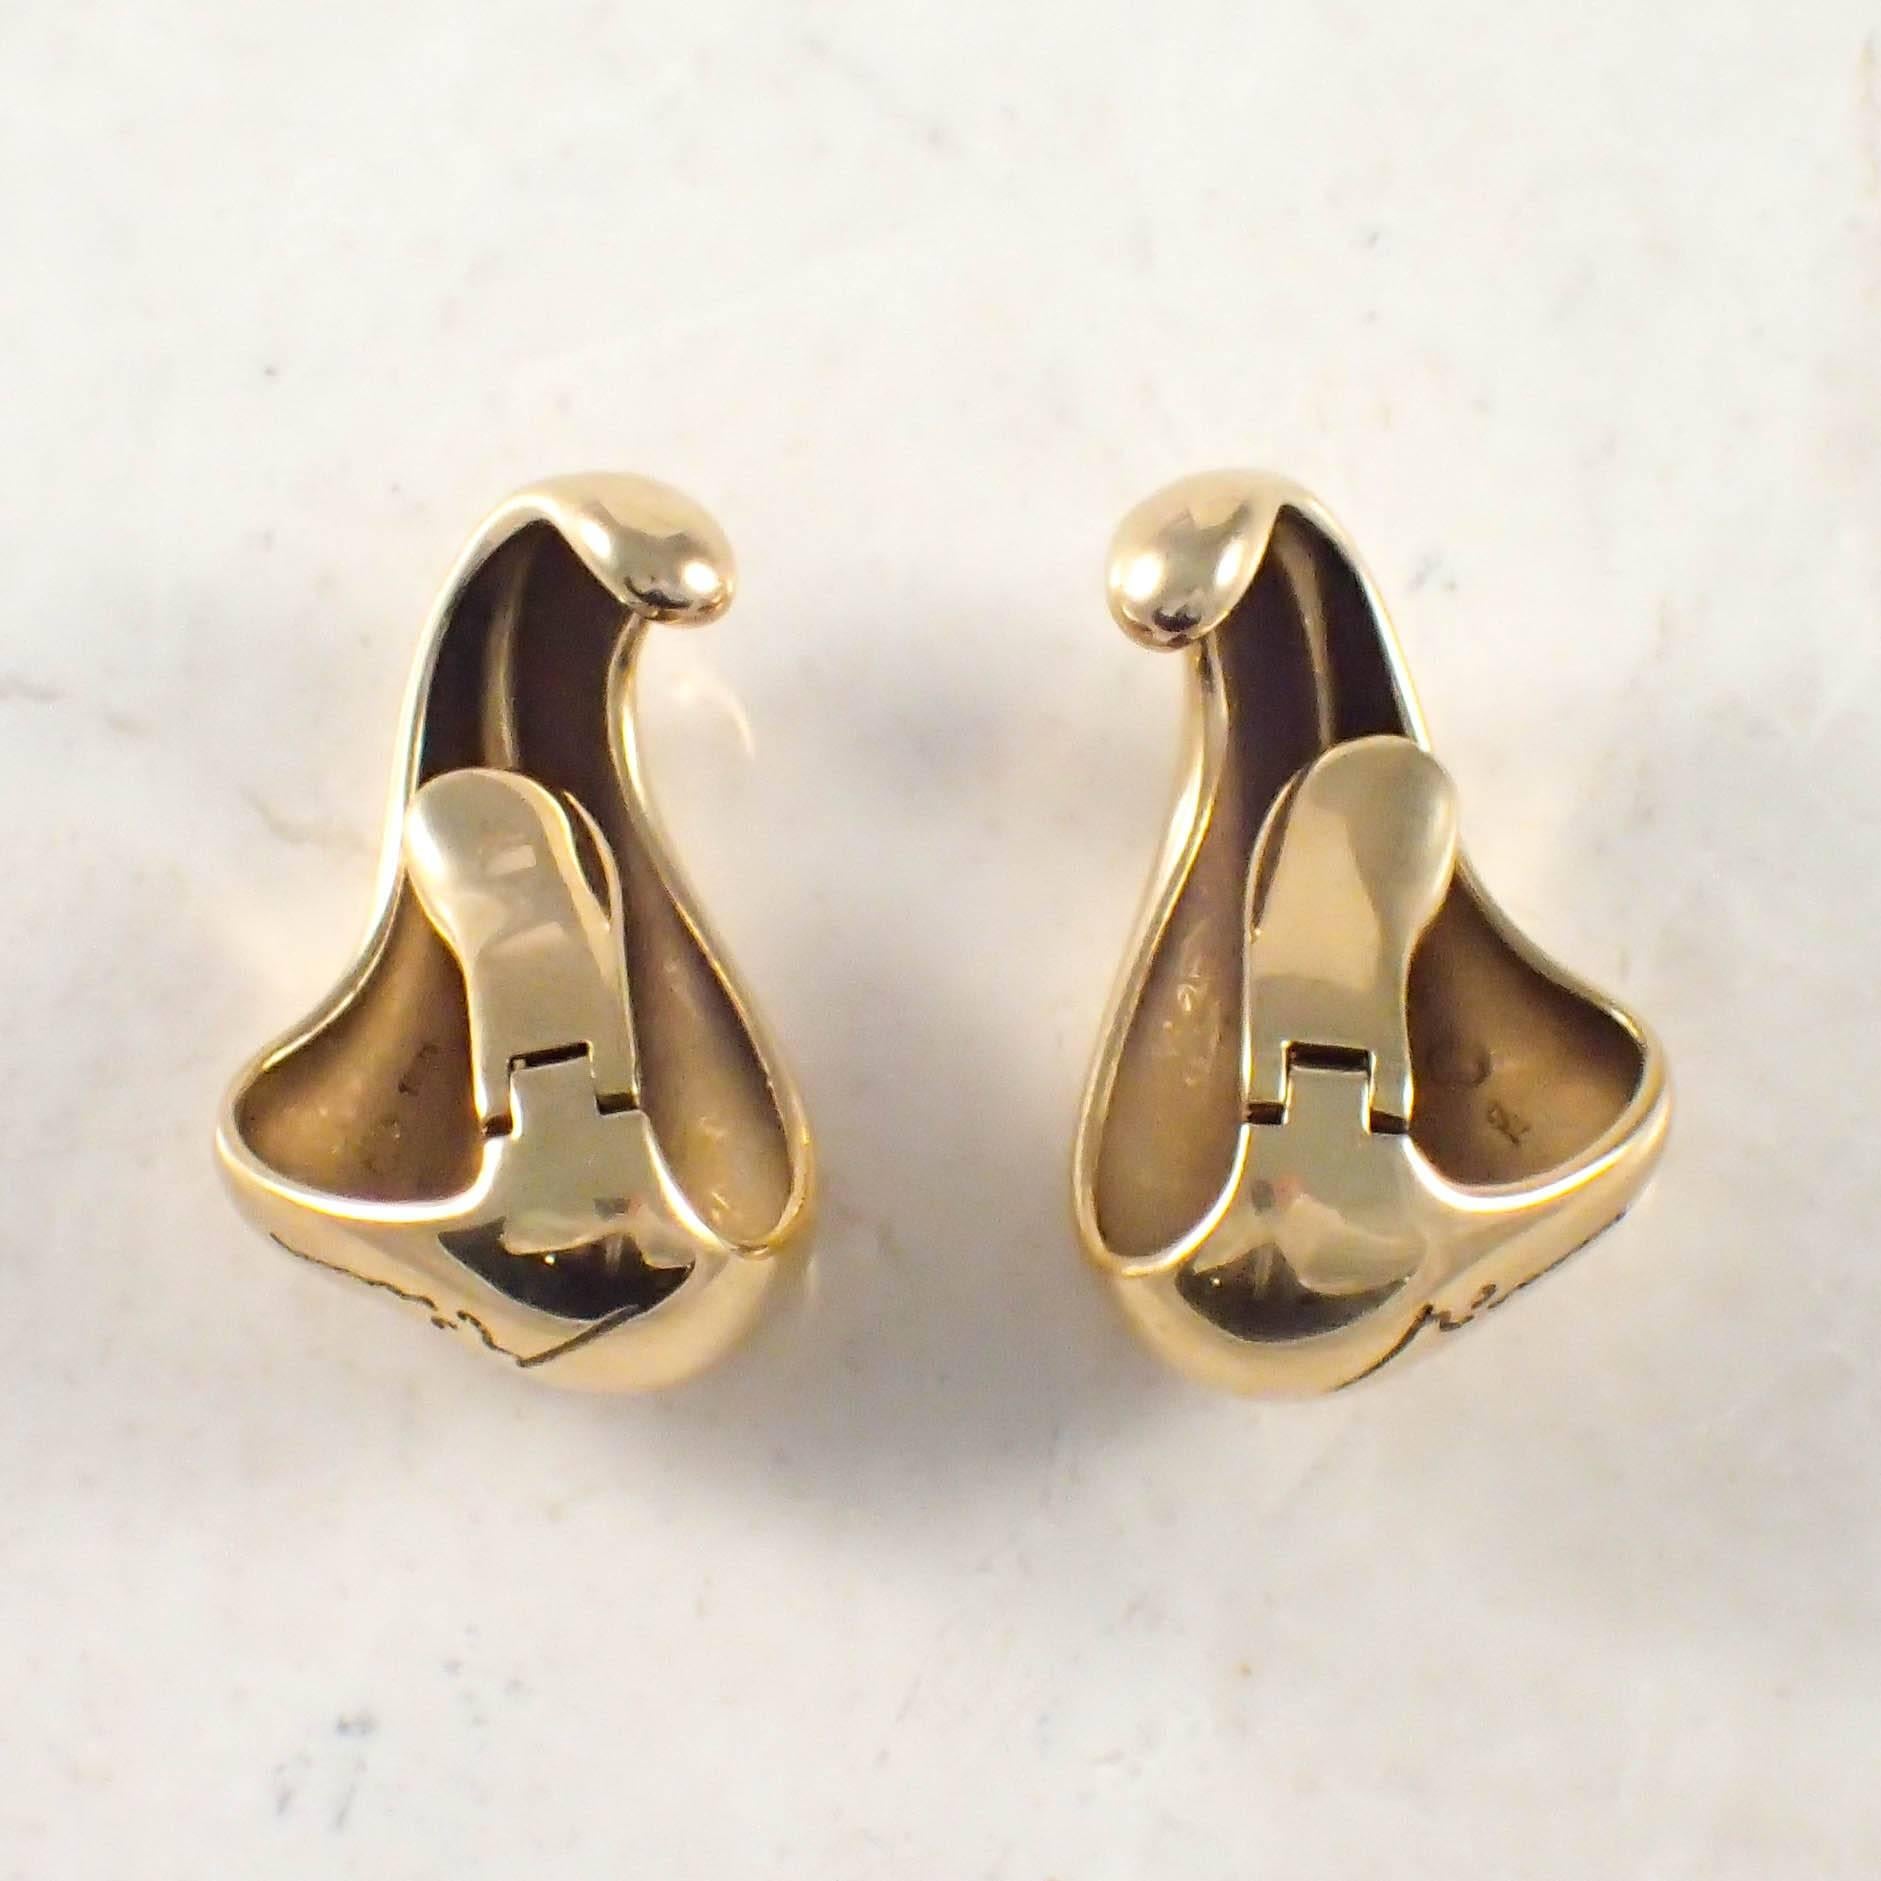 18K Yellow gold Georg Jensen earrings. The ear cuff clip-on earrings measure 1 1/4 X 3/4 inch and weigh 15.9 DWTs. Stamp Georg Jensen 1221 750. Circa 1960s.